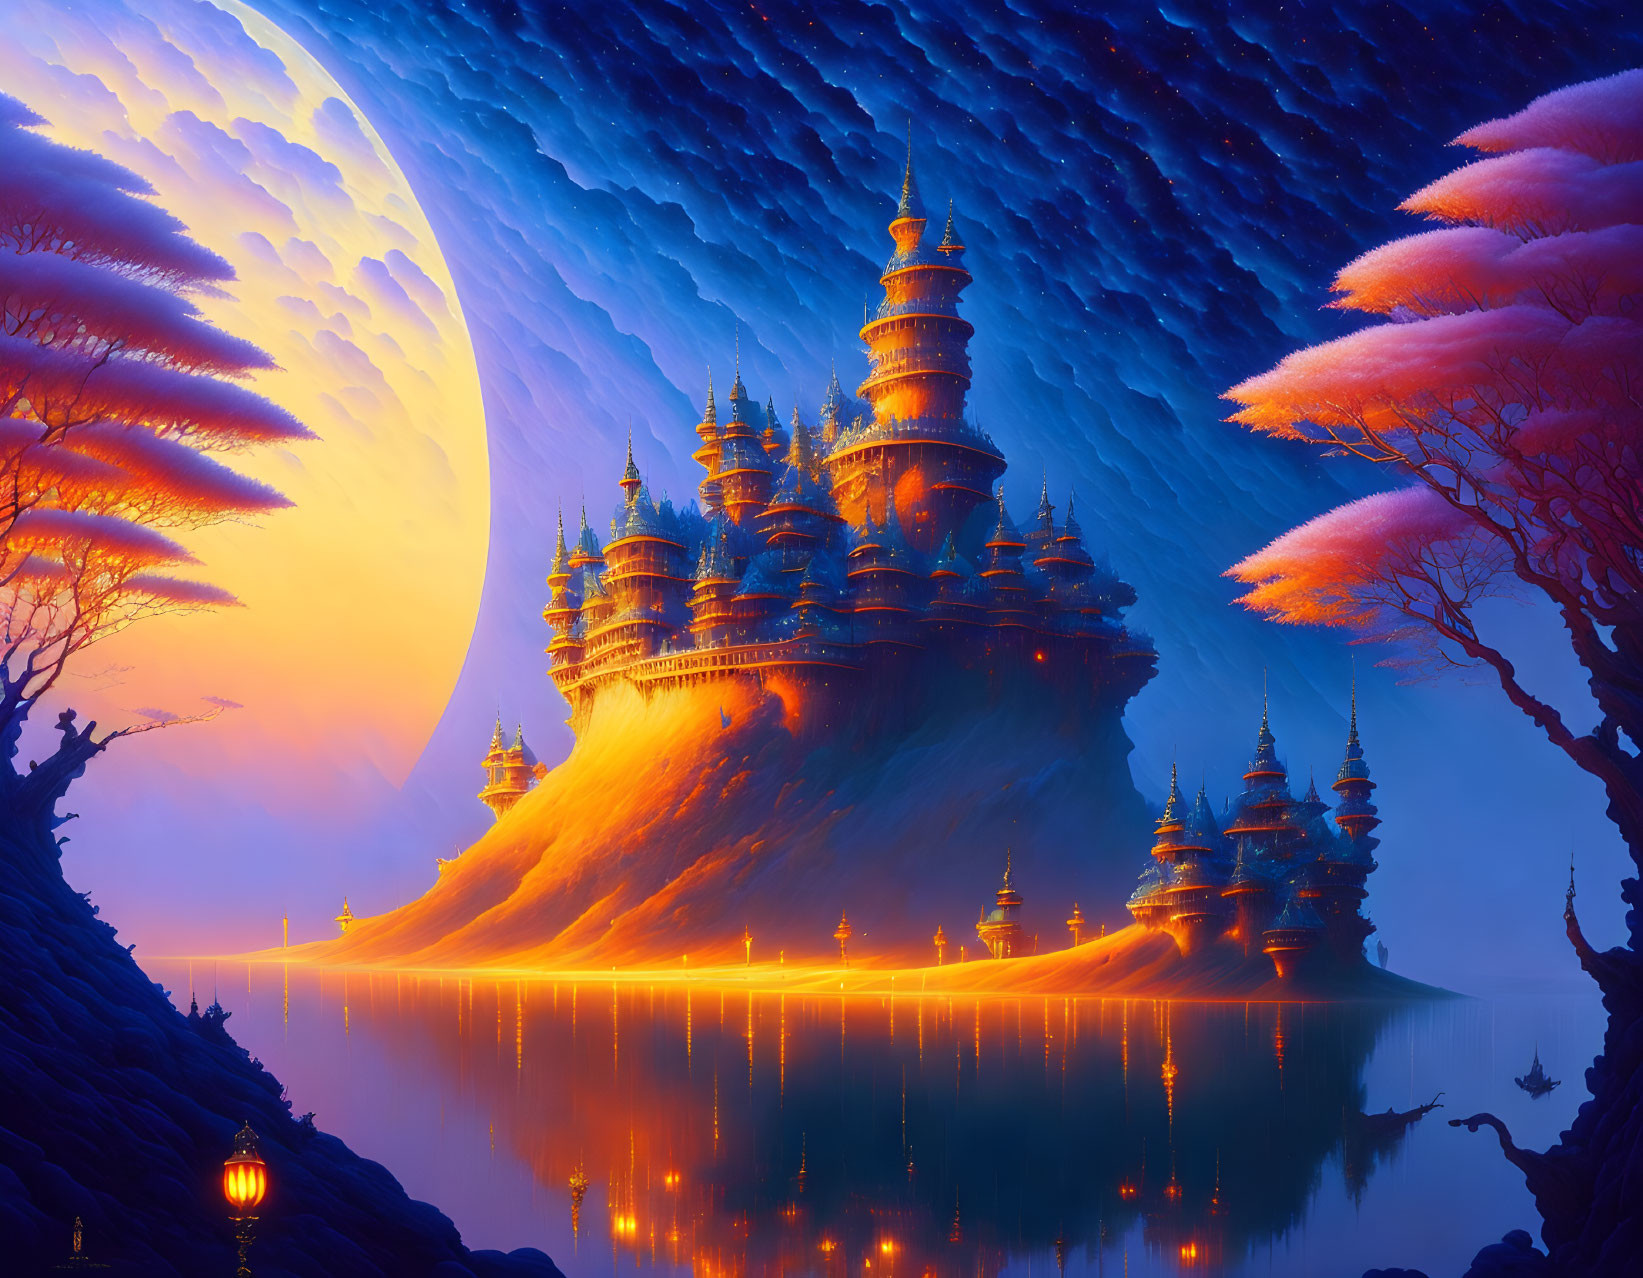 Digital artwork: Mystical Asian palace with pagodas under moon by tranquil lake.